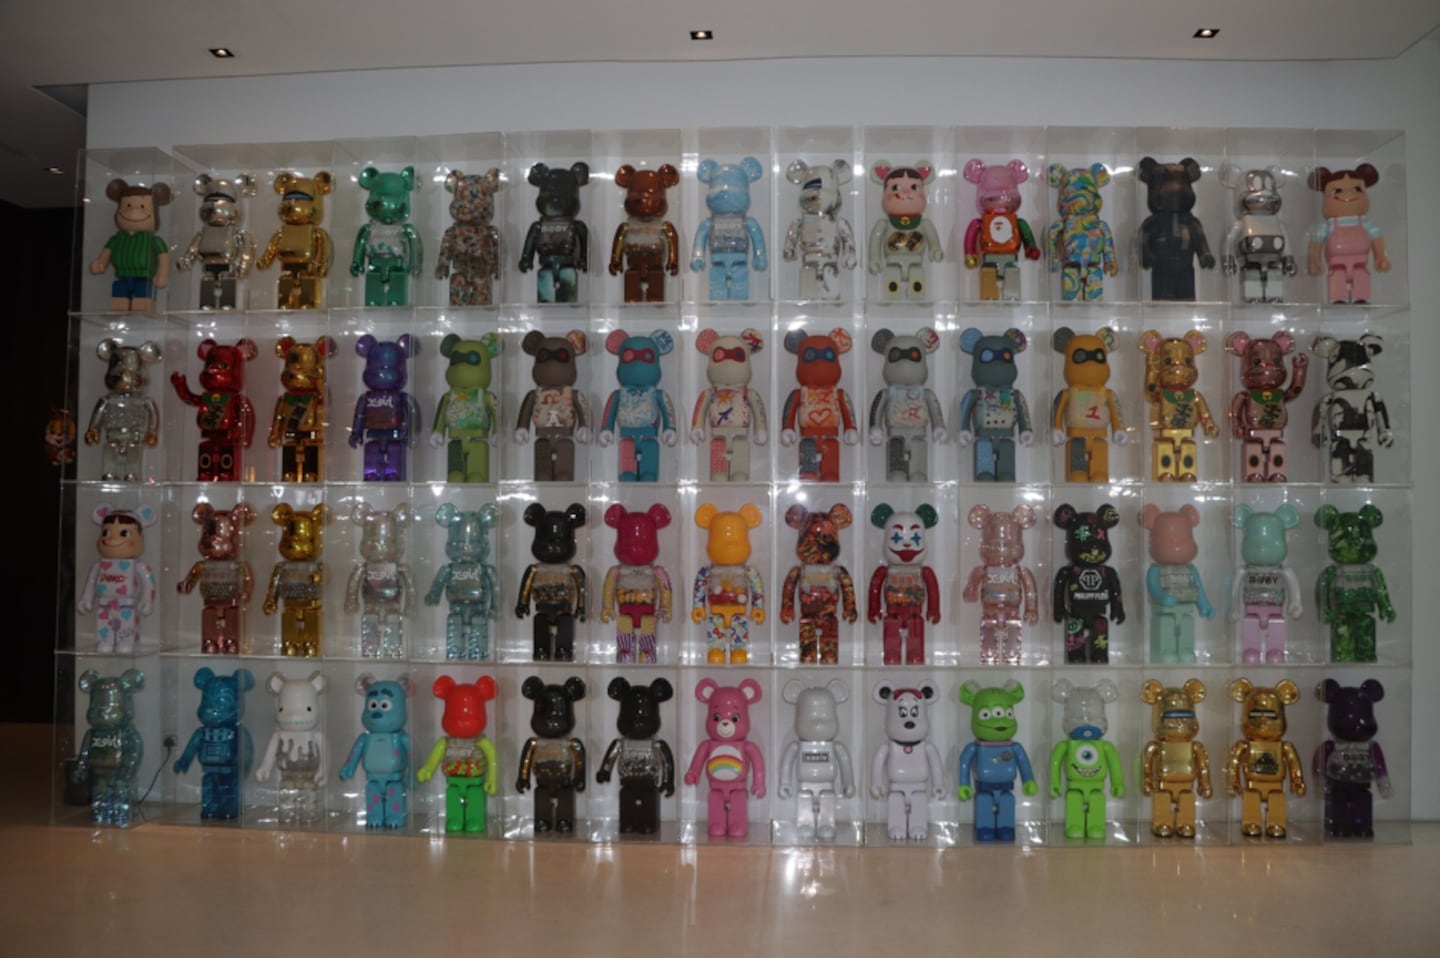 Among the stranger items was a large collection of Bearbricks, a Japanese designer toy.